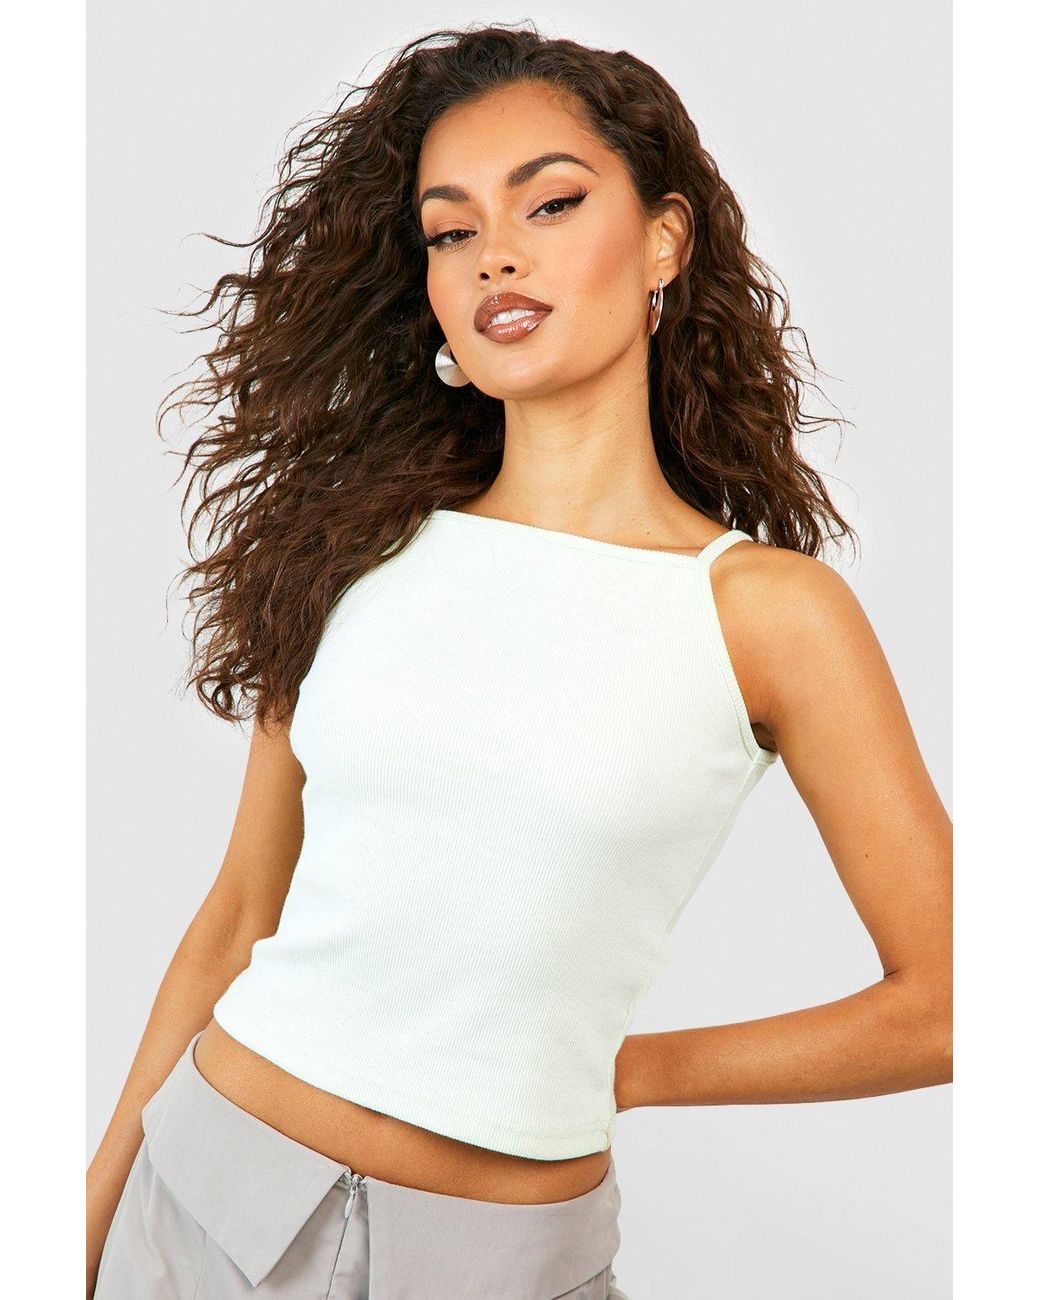 Boohoo Halter Strappy Rib Crop Top in White